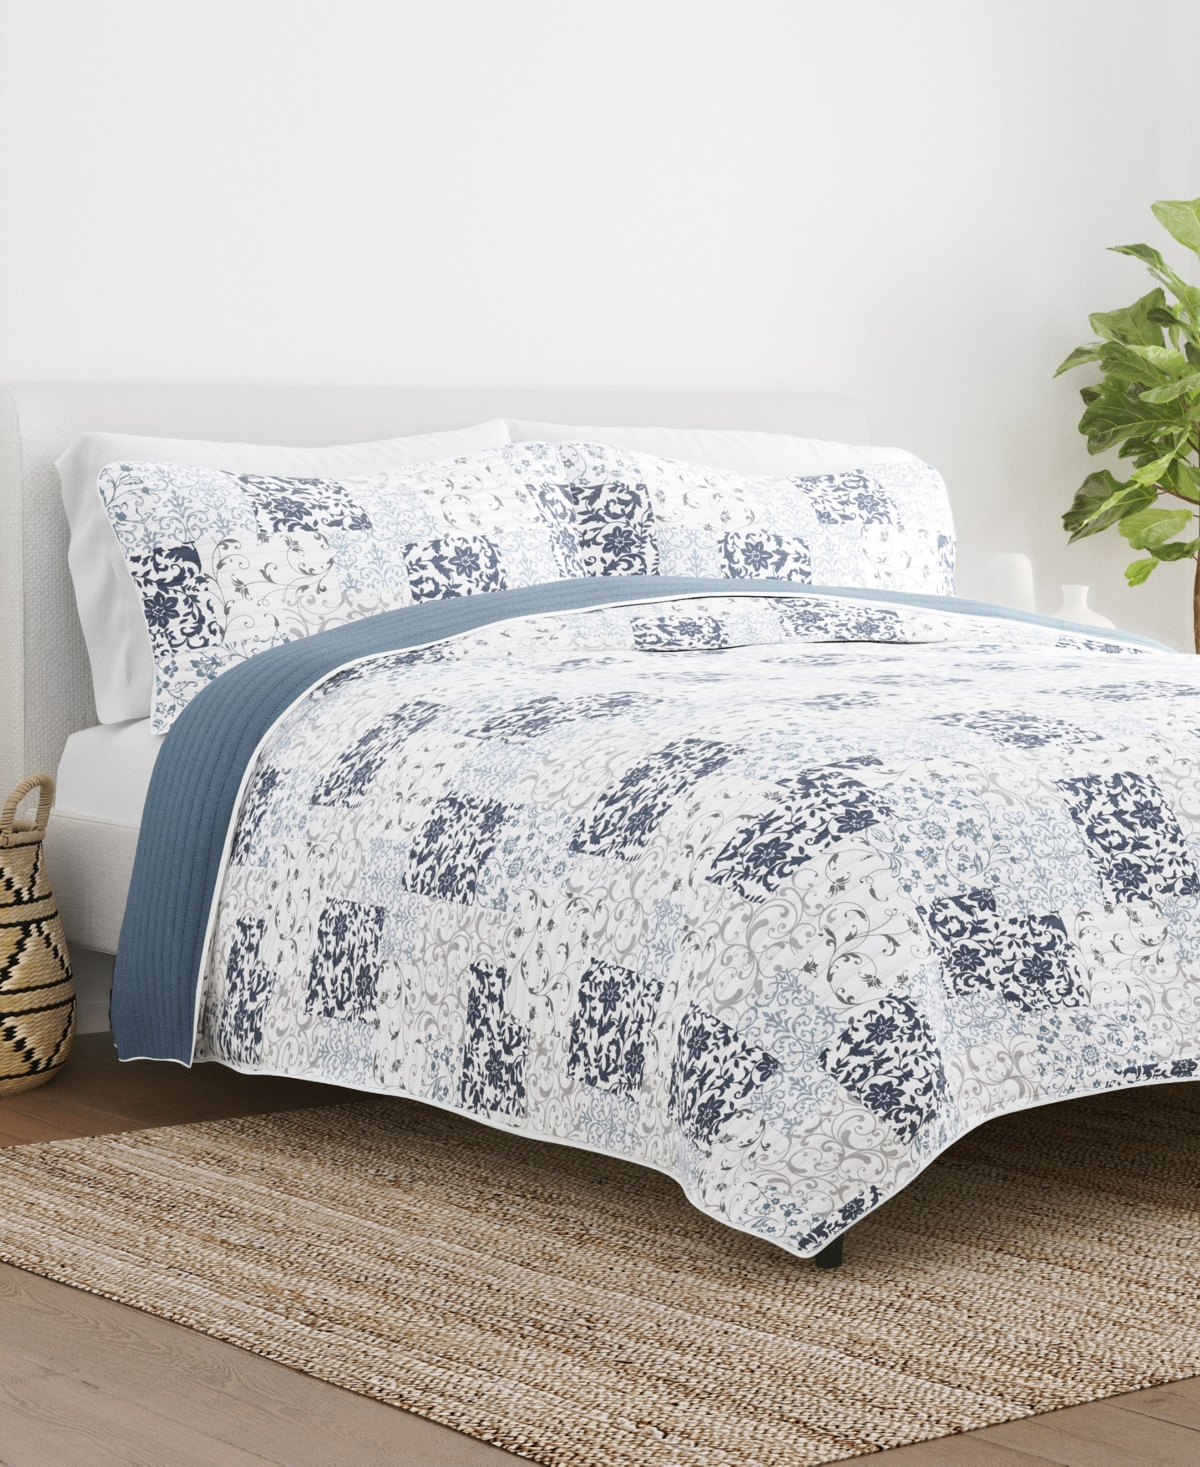 Ienjoy Home All Season 3 Piece Scrolled Patchwork Reversible Quilt Set, Full/queen In Dusk Blue